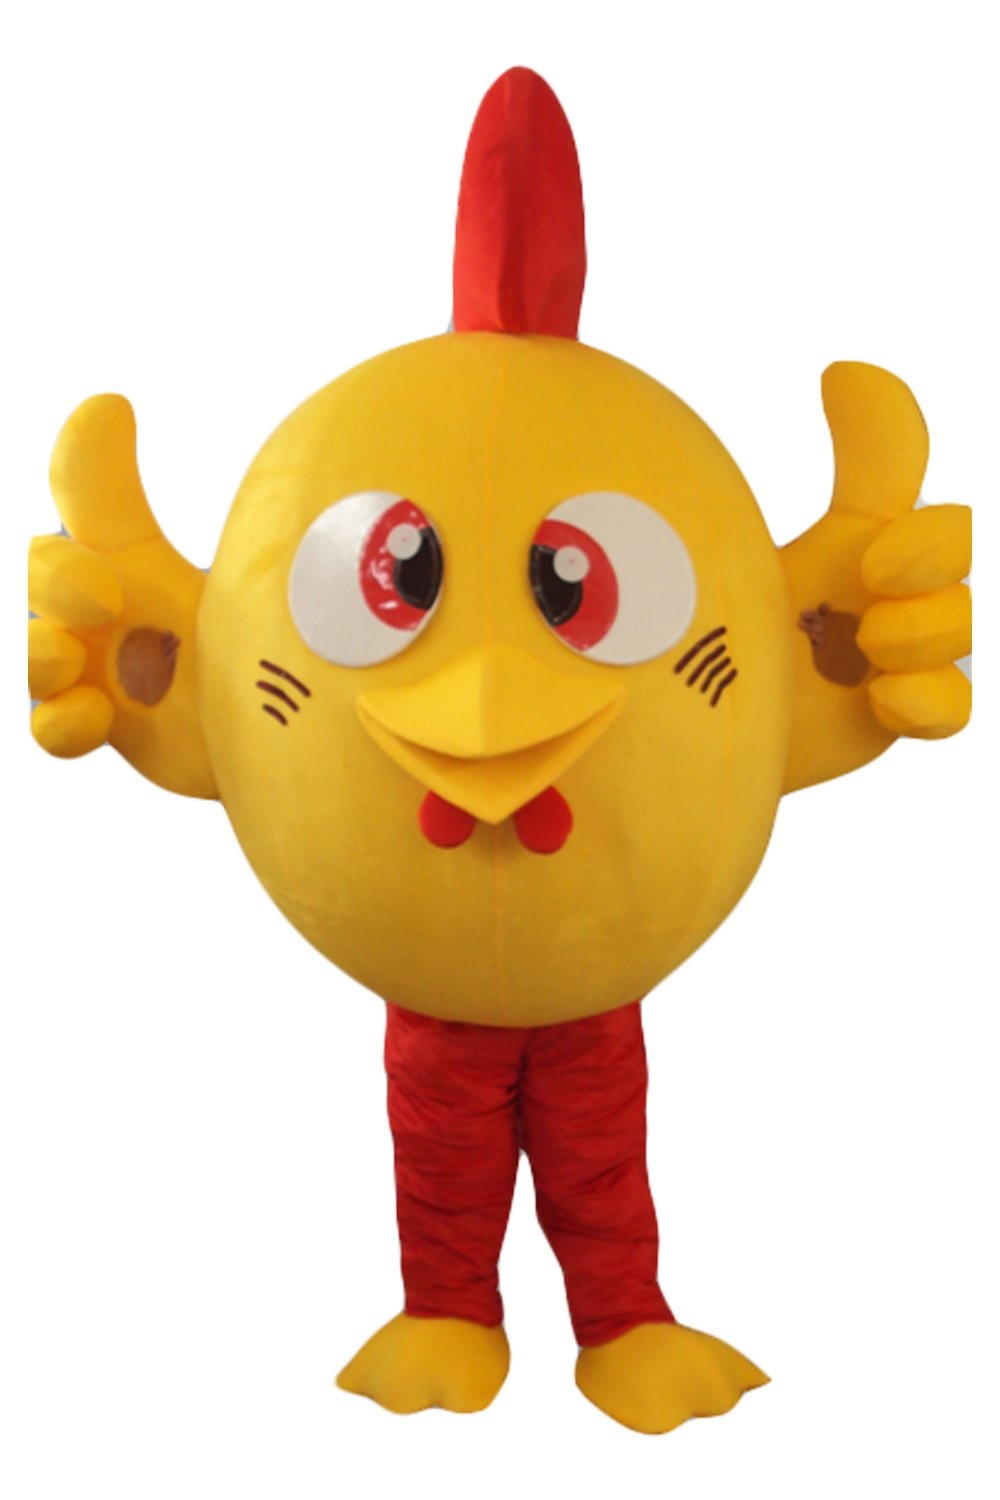 Brand New Cute Chicken Mascot Costume Outfit Suit